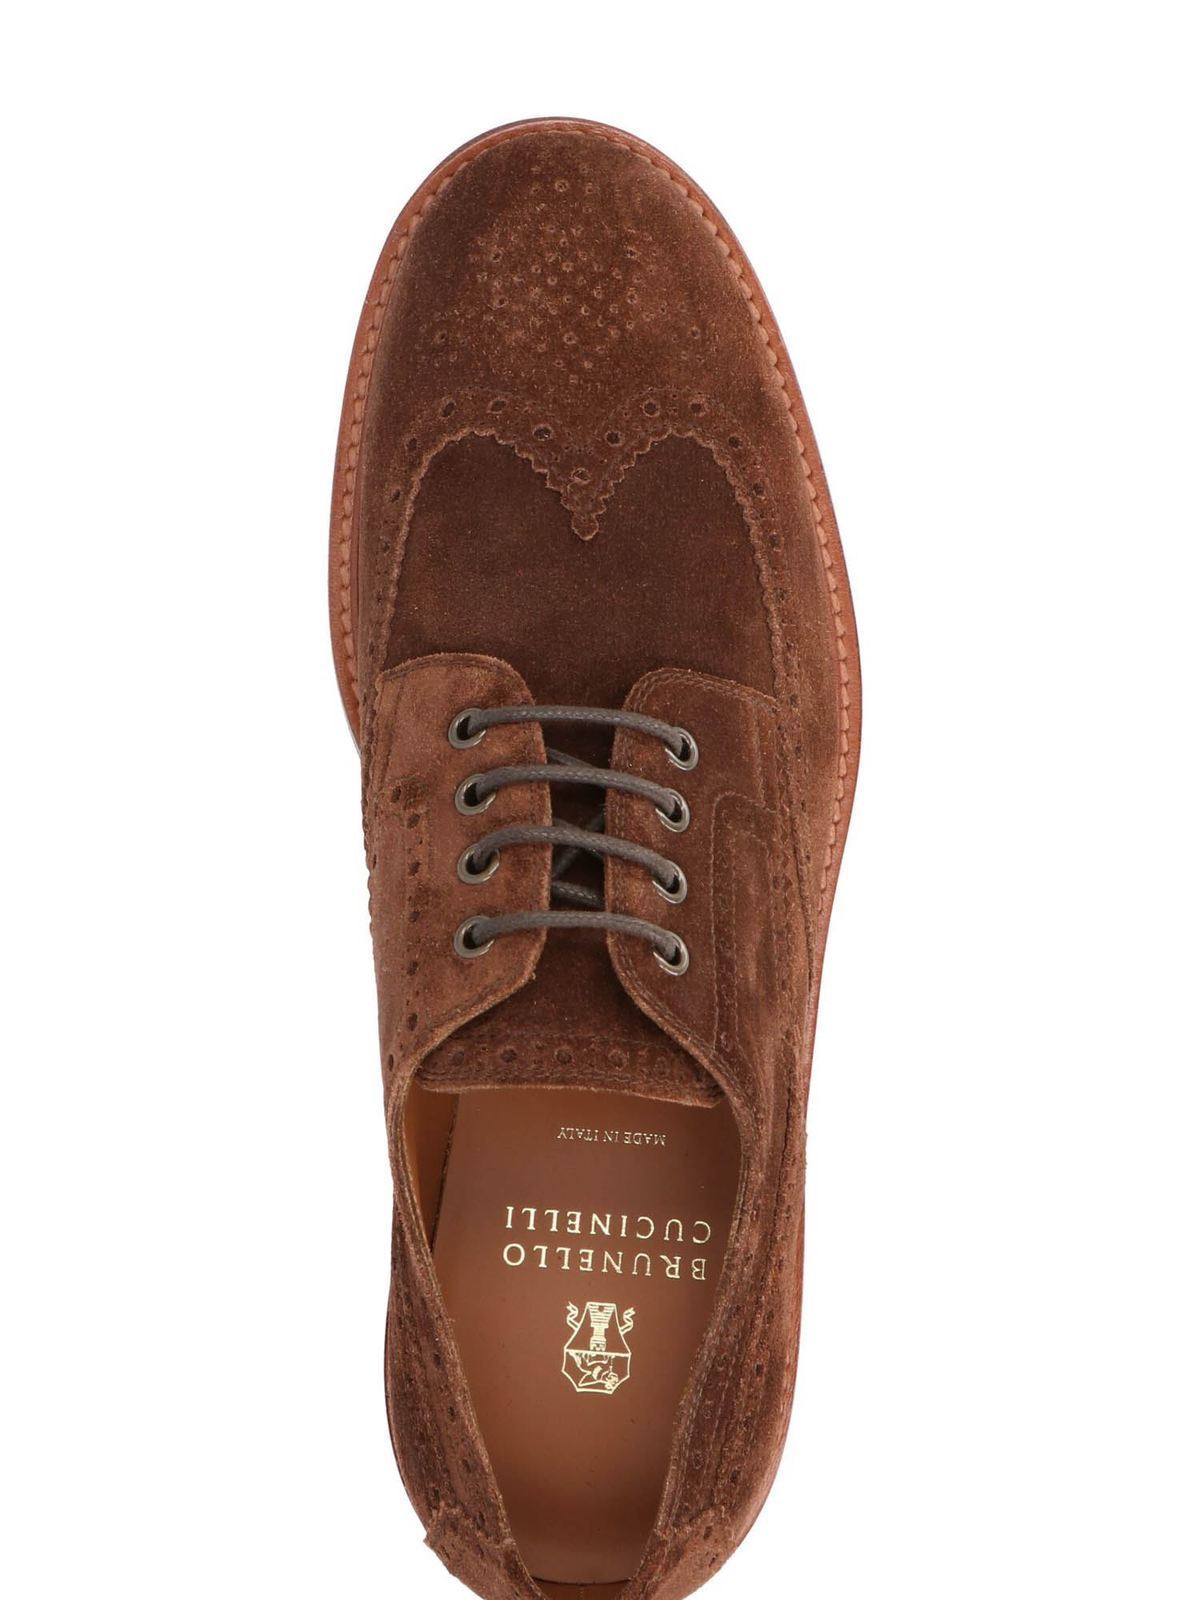 Brunello Cucinelli Suede Brogues in Brown for Men Mens Shoes Lace-ups Brogues 